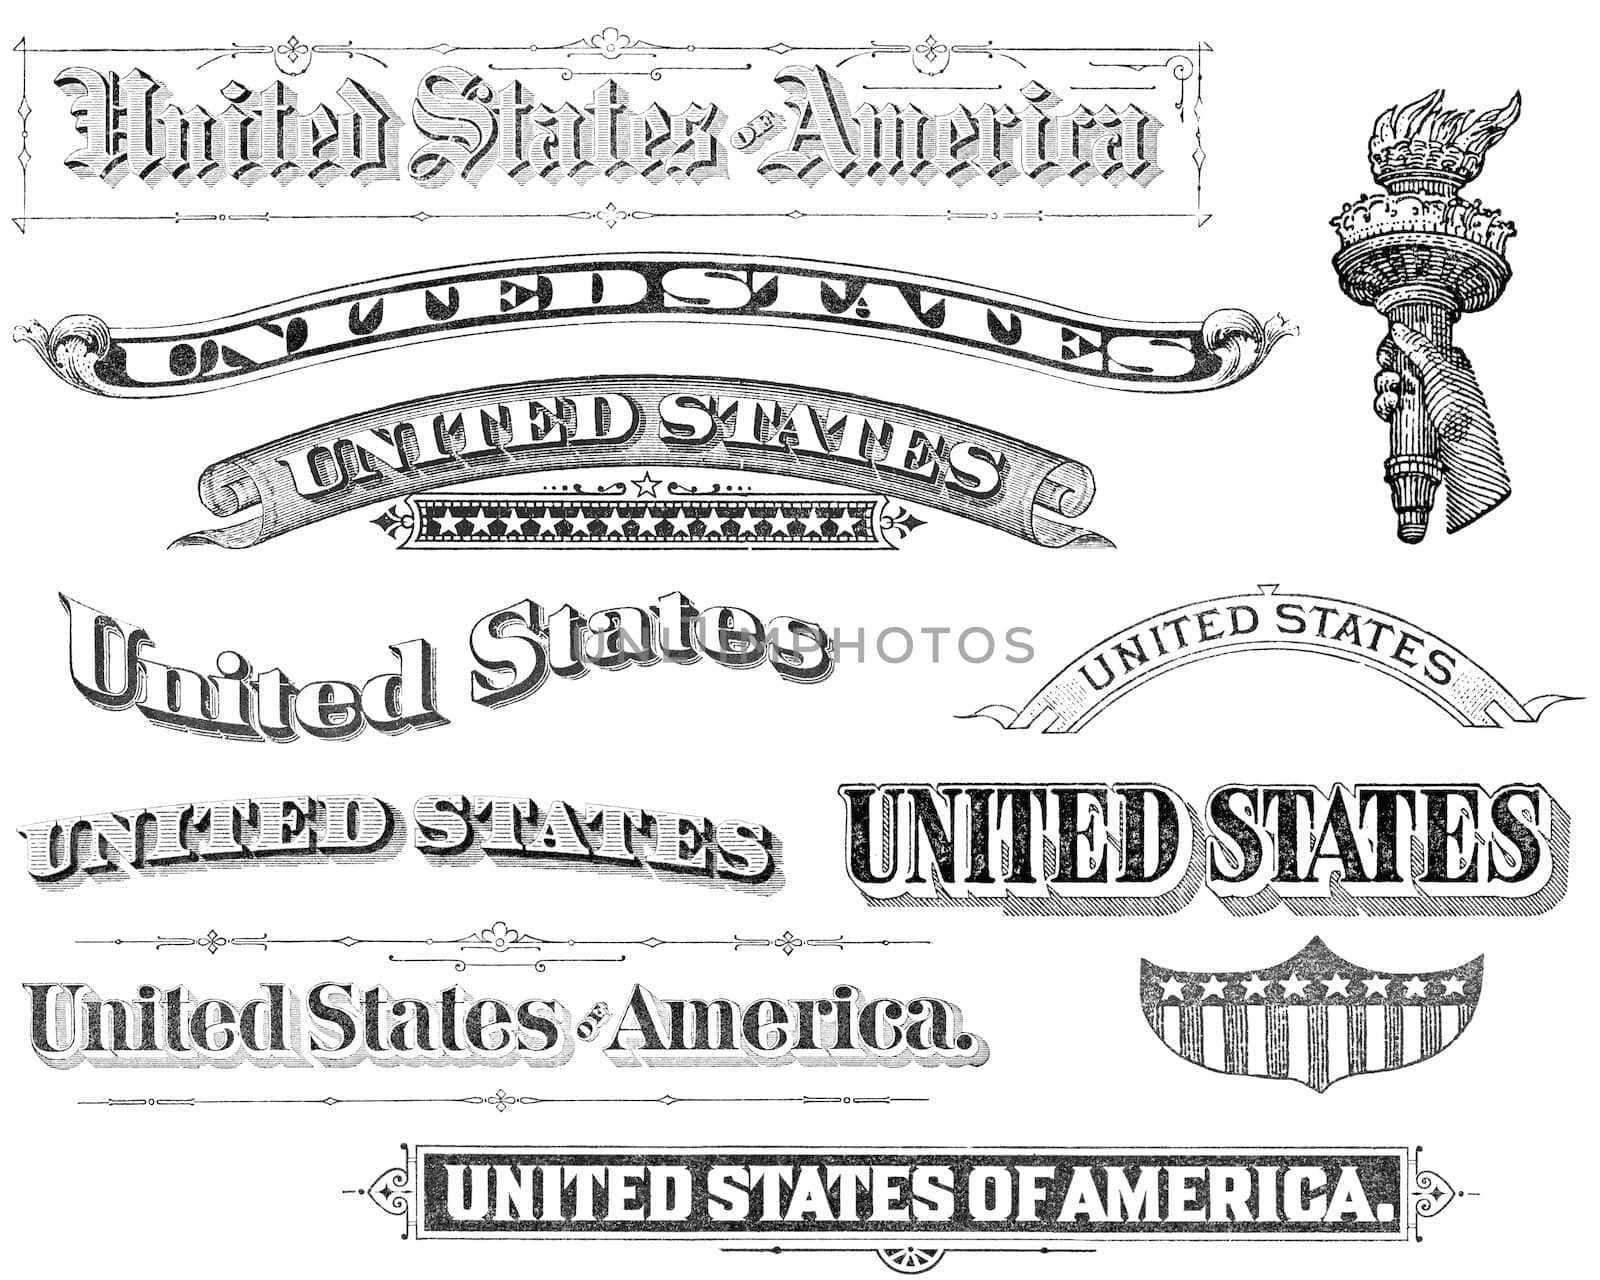 Old, distressed black and white treatments of "United States" from 1870 through 1921.  Isolated on white.